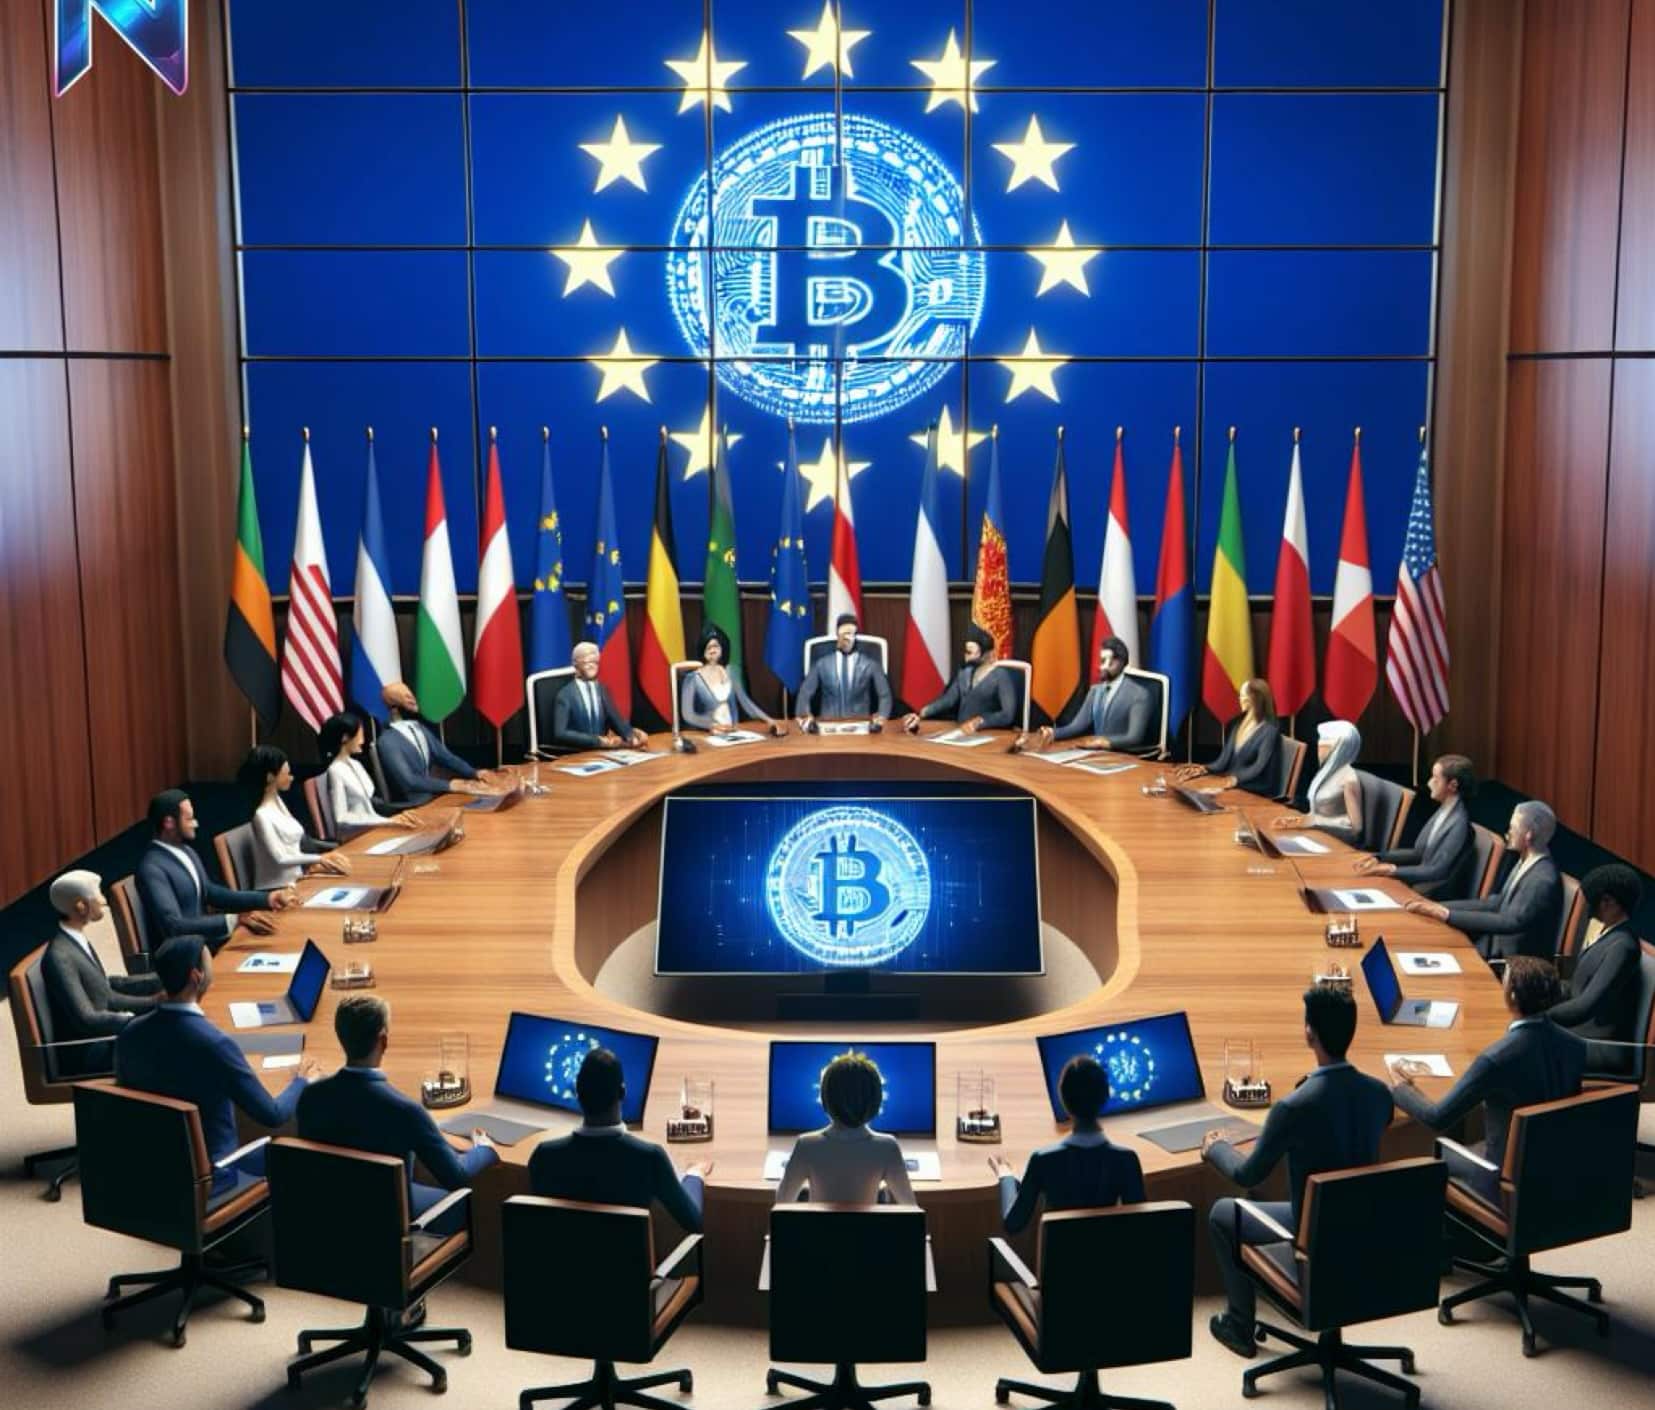 Key legislation positions may need new leaders depending on election results which could lead to a period of uncertainty for crypto industry.